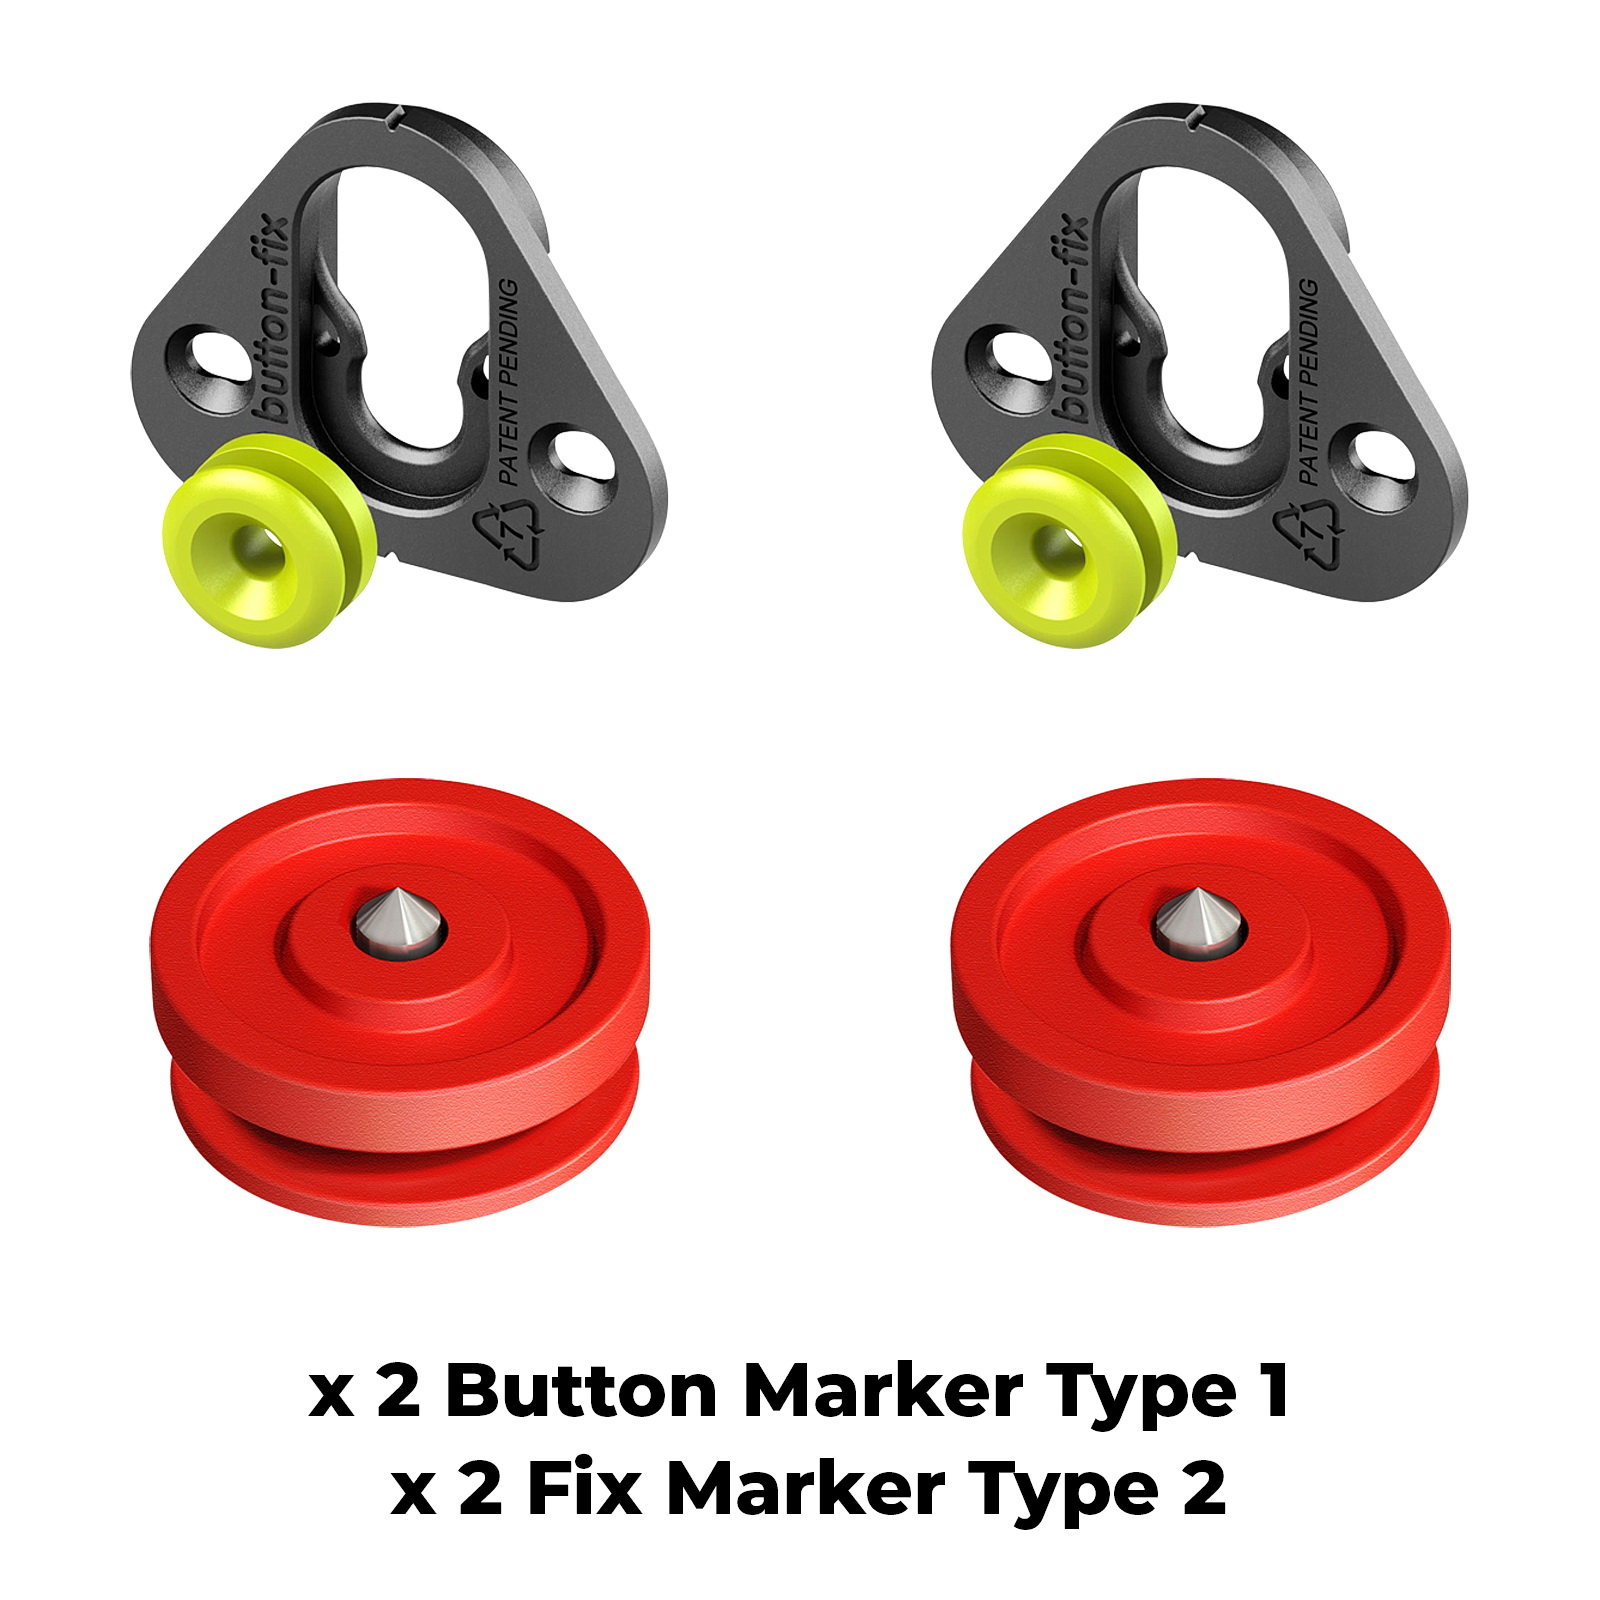 Button Fix Type 1 Bracket Marker Guide Kit Connecting Panels x2 + 2 Marker Tools